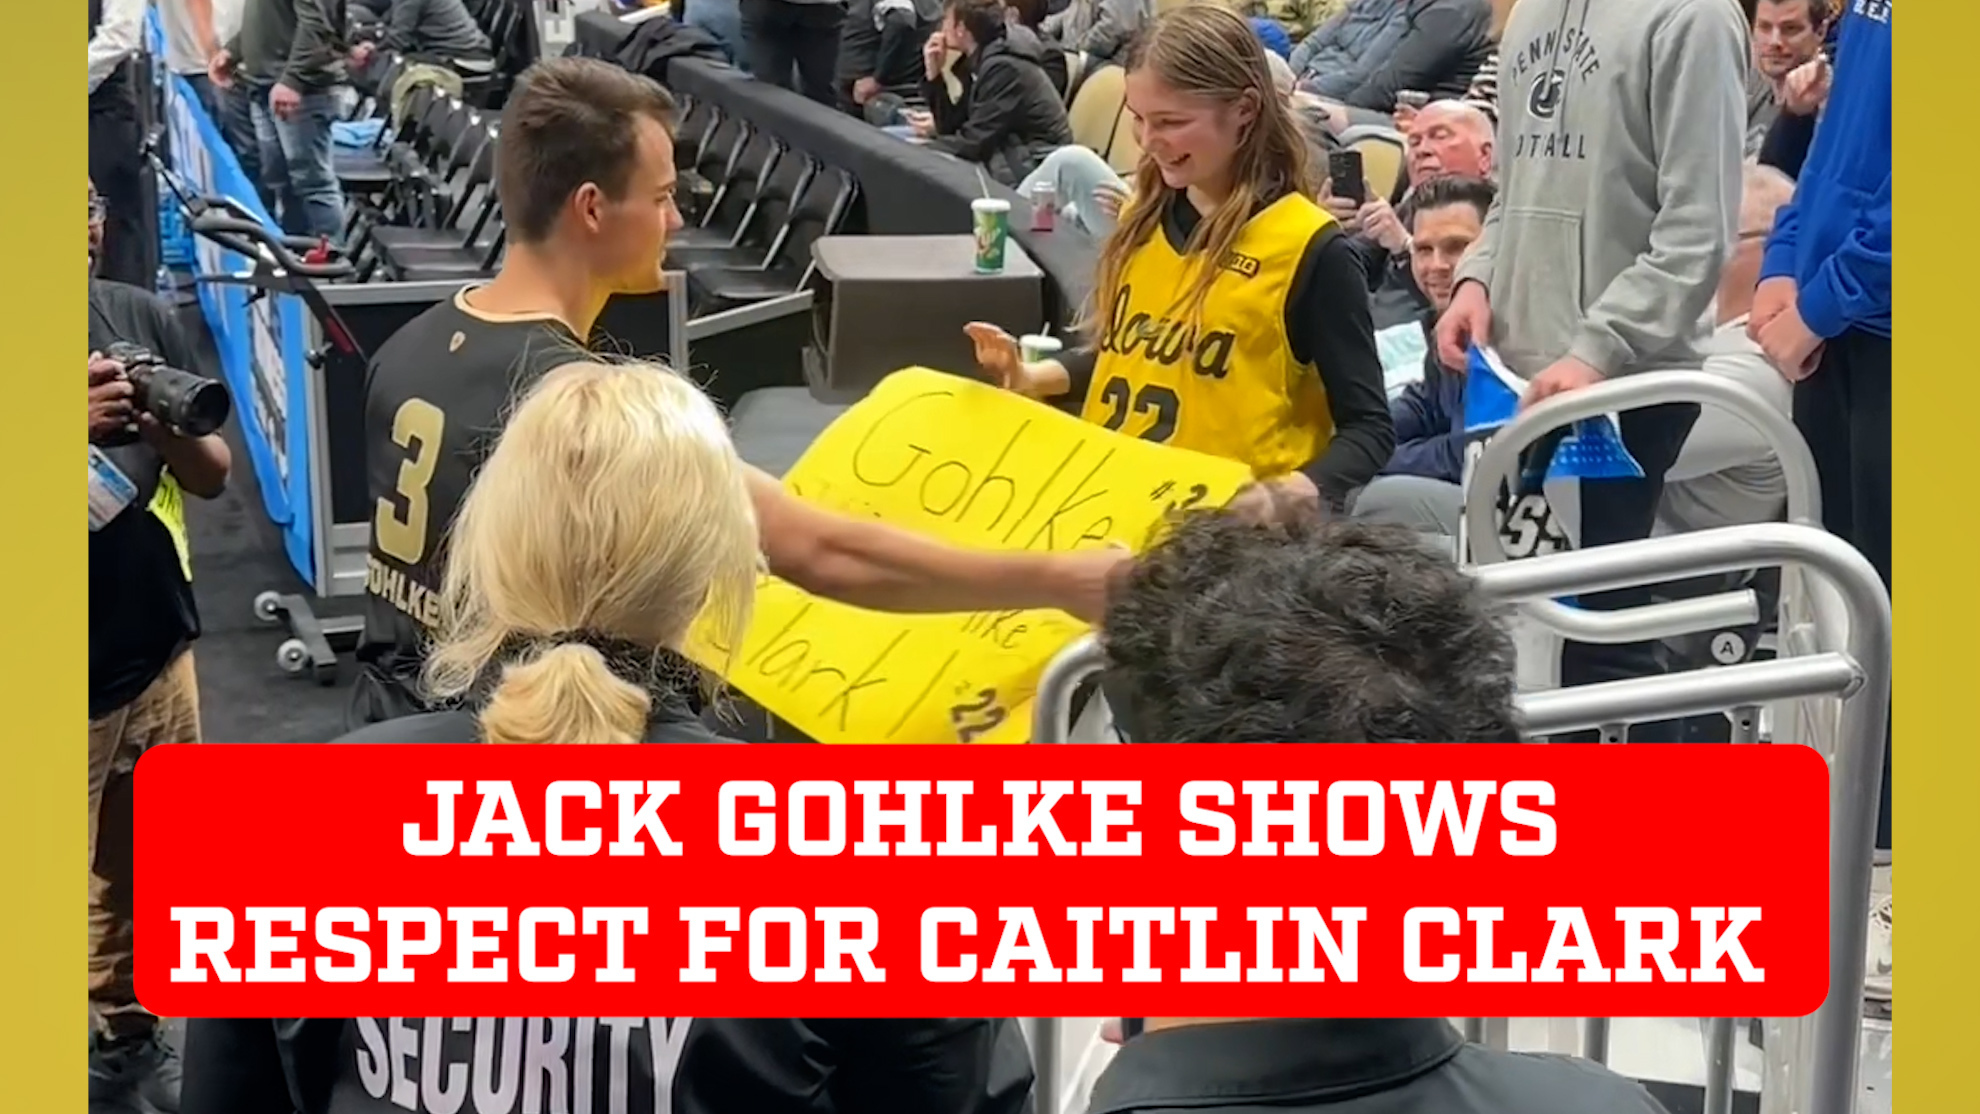 Caitlin Clark inspired Jack Gohlke, the biggest star of mens March Madness